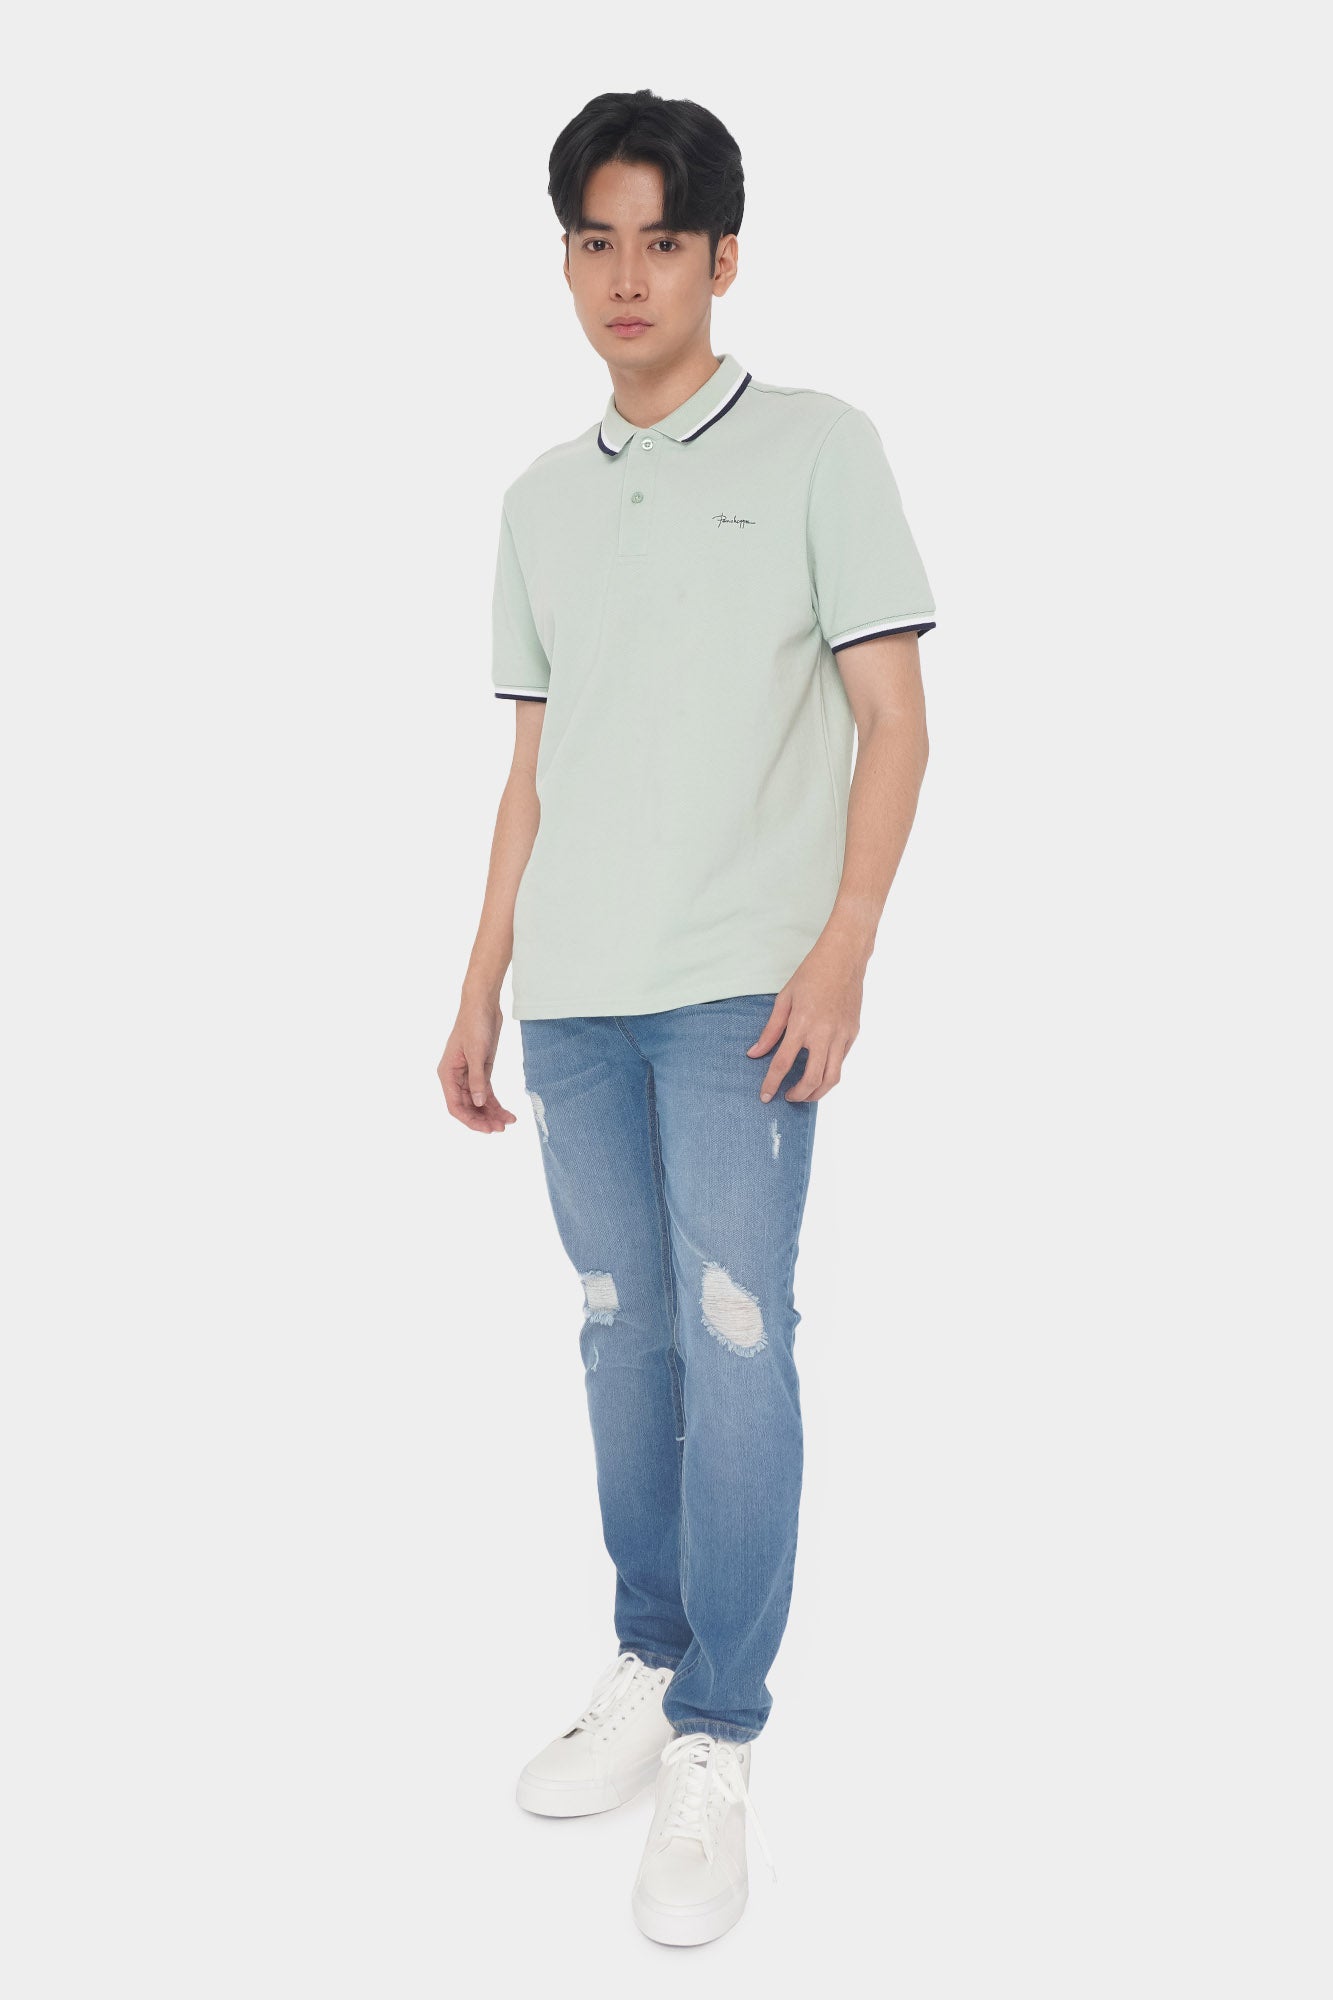 Fit Relaxed Basic Tipping – International with Penshoppe Polo Collar